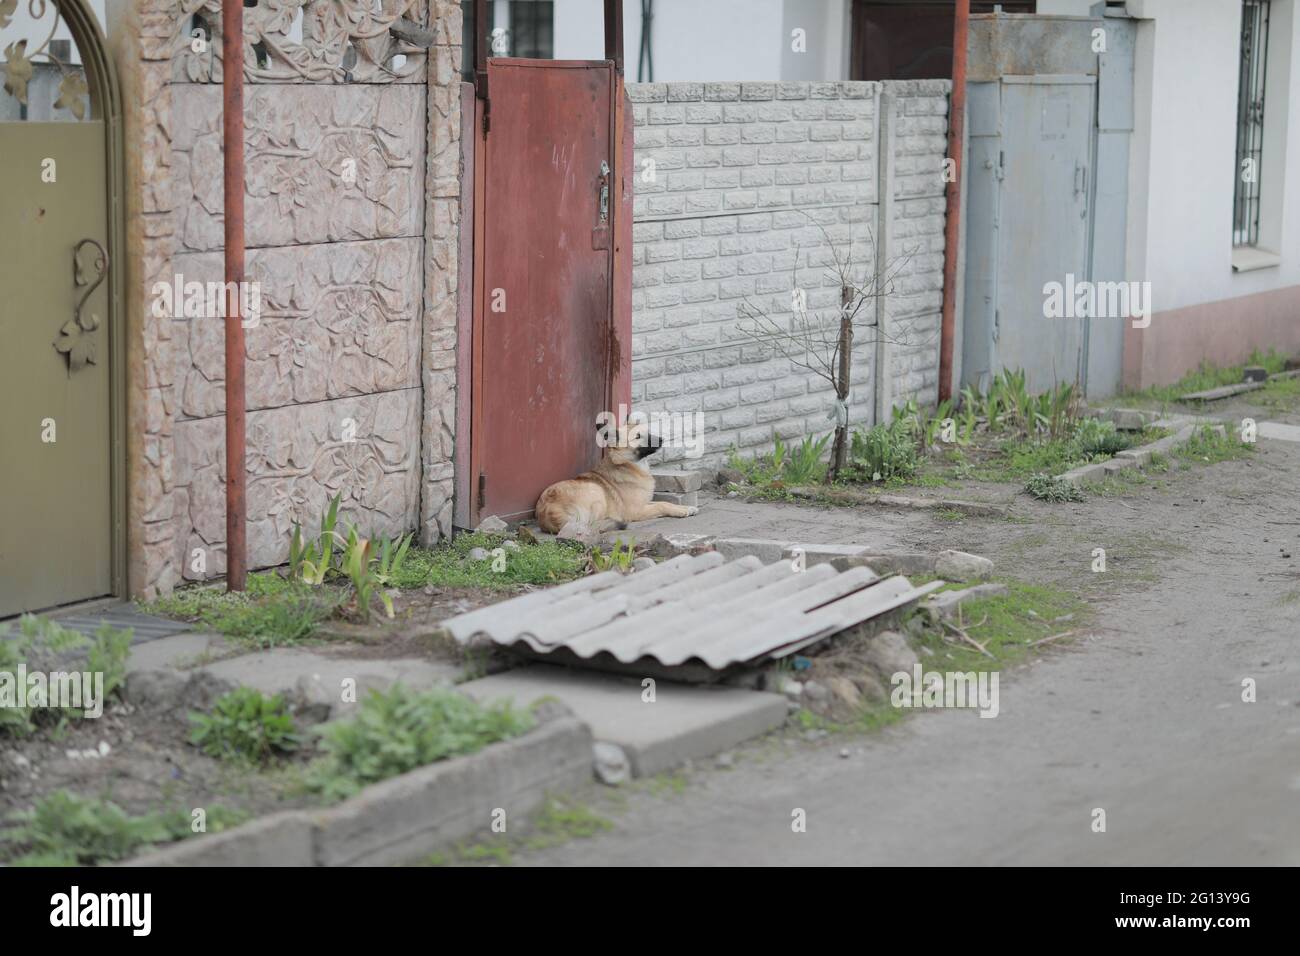 A dog sitting in front of a brick building Stock Photo